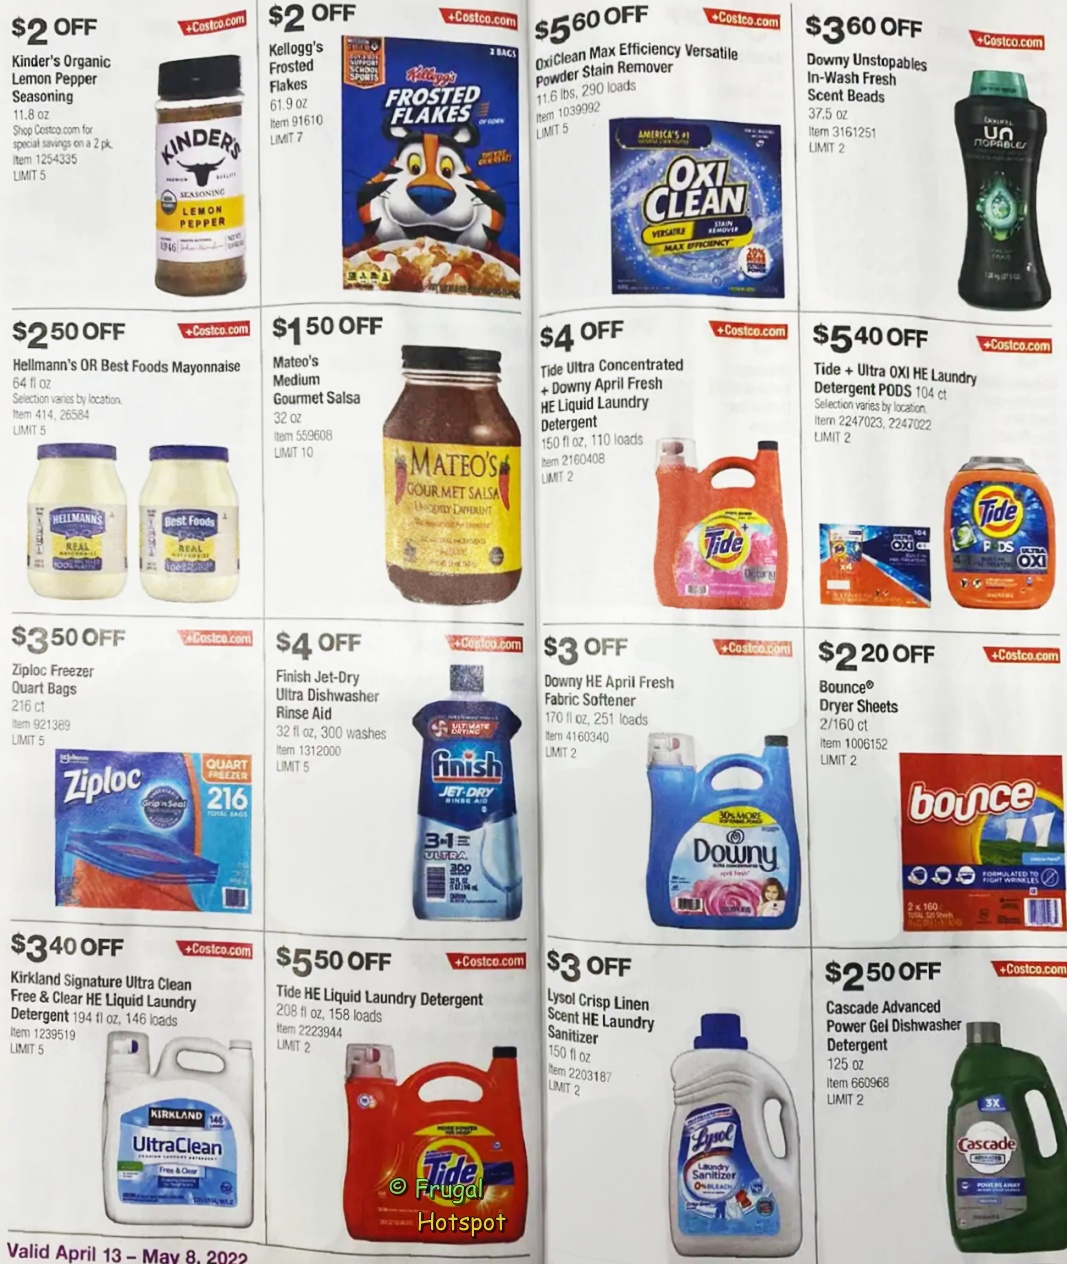 Costco Coupon Book APRIL 2022 | P 15 and 16